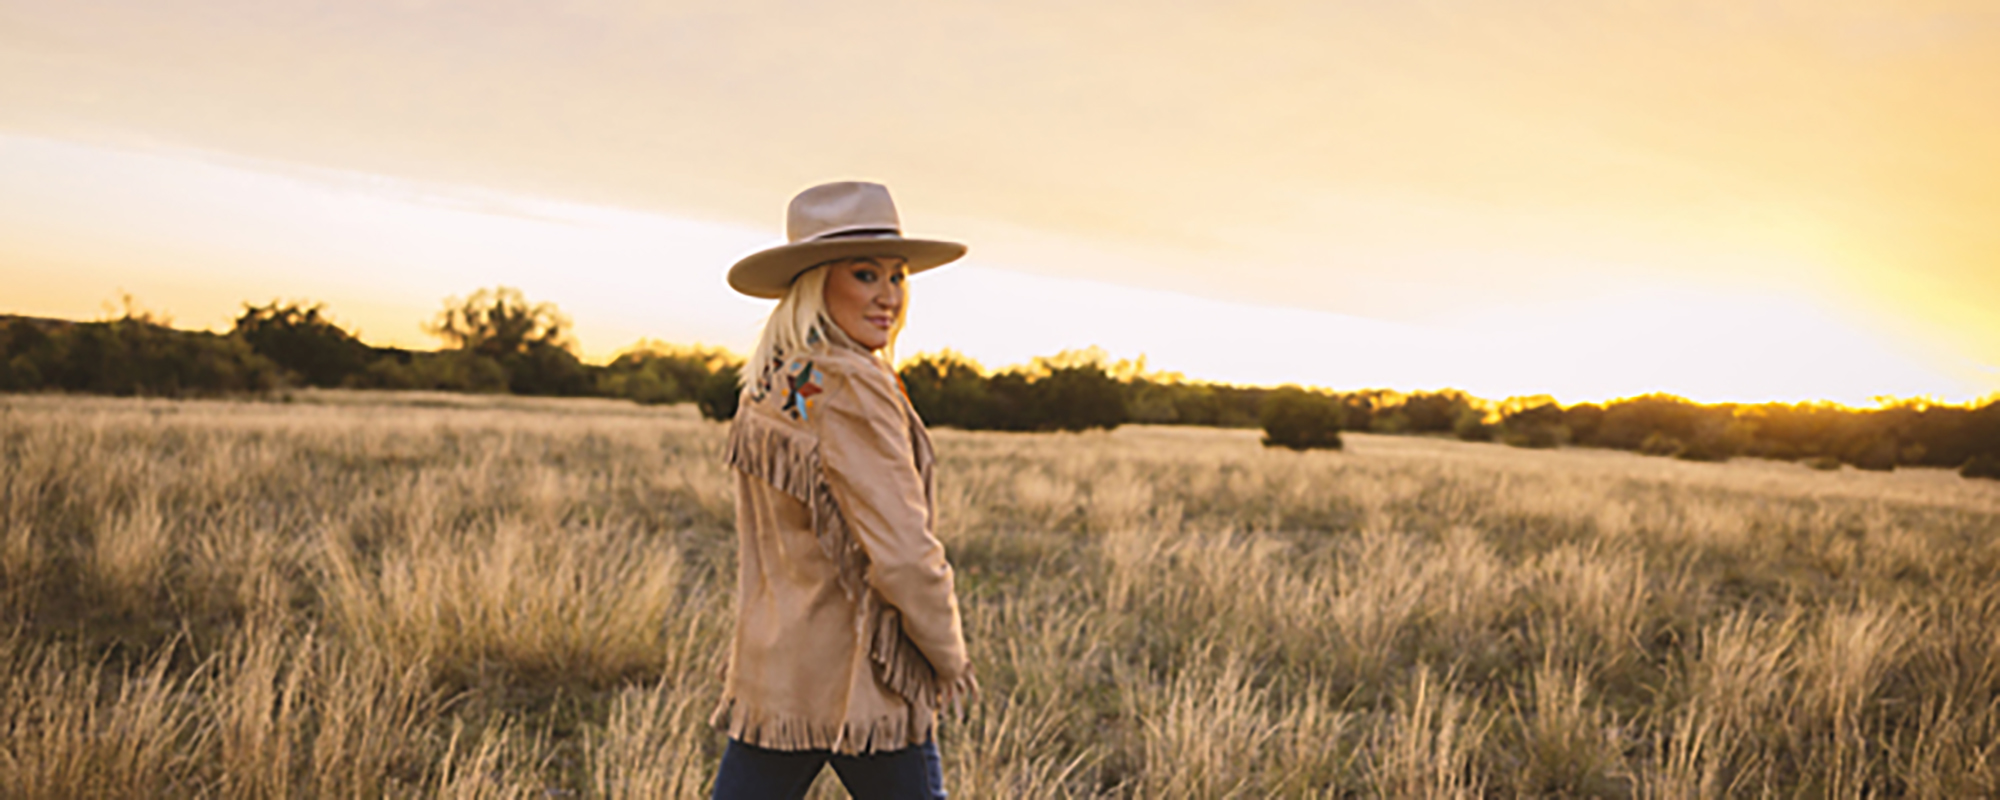 Review: Tanya Tucker Shares Her Sweet Western Sound